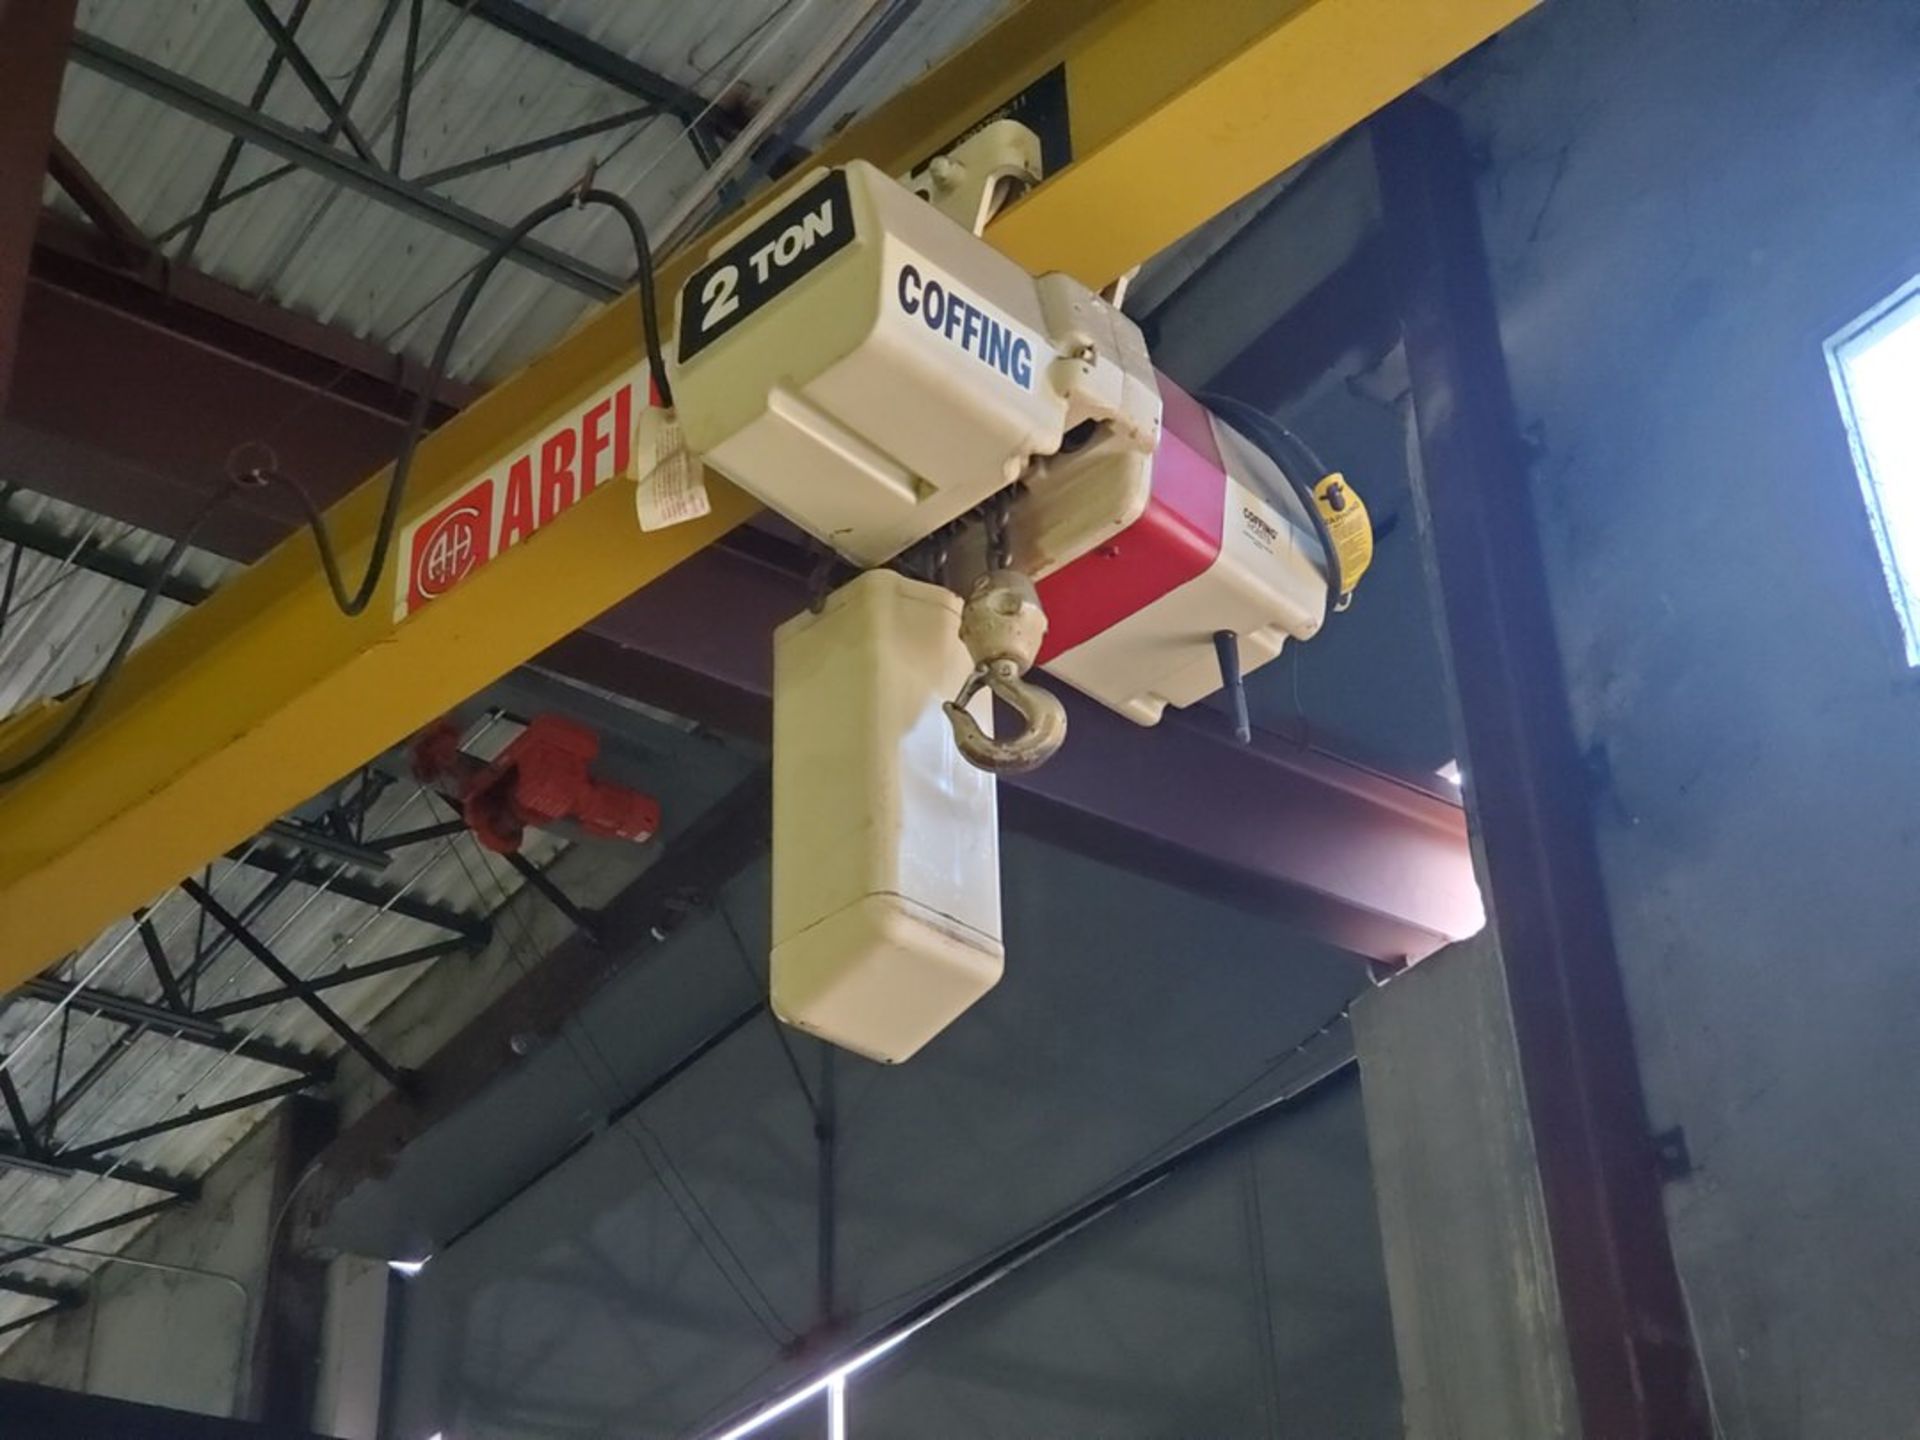 Abbell Howe Wall Mounted 2 Ton Jib Crane w/ 2-Ton Coffing Hoist & 2-Button Pendant - Image 5 of 13